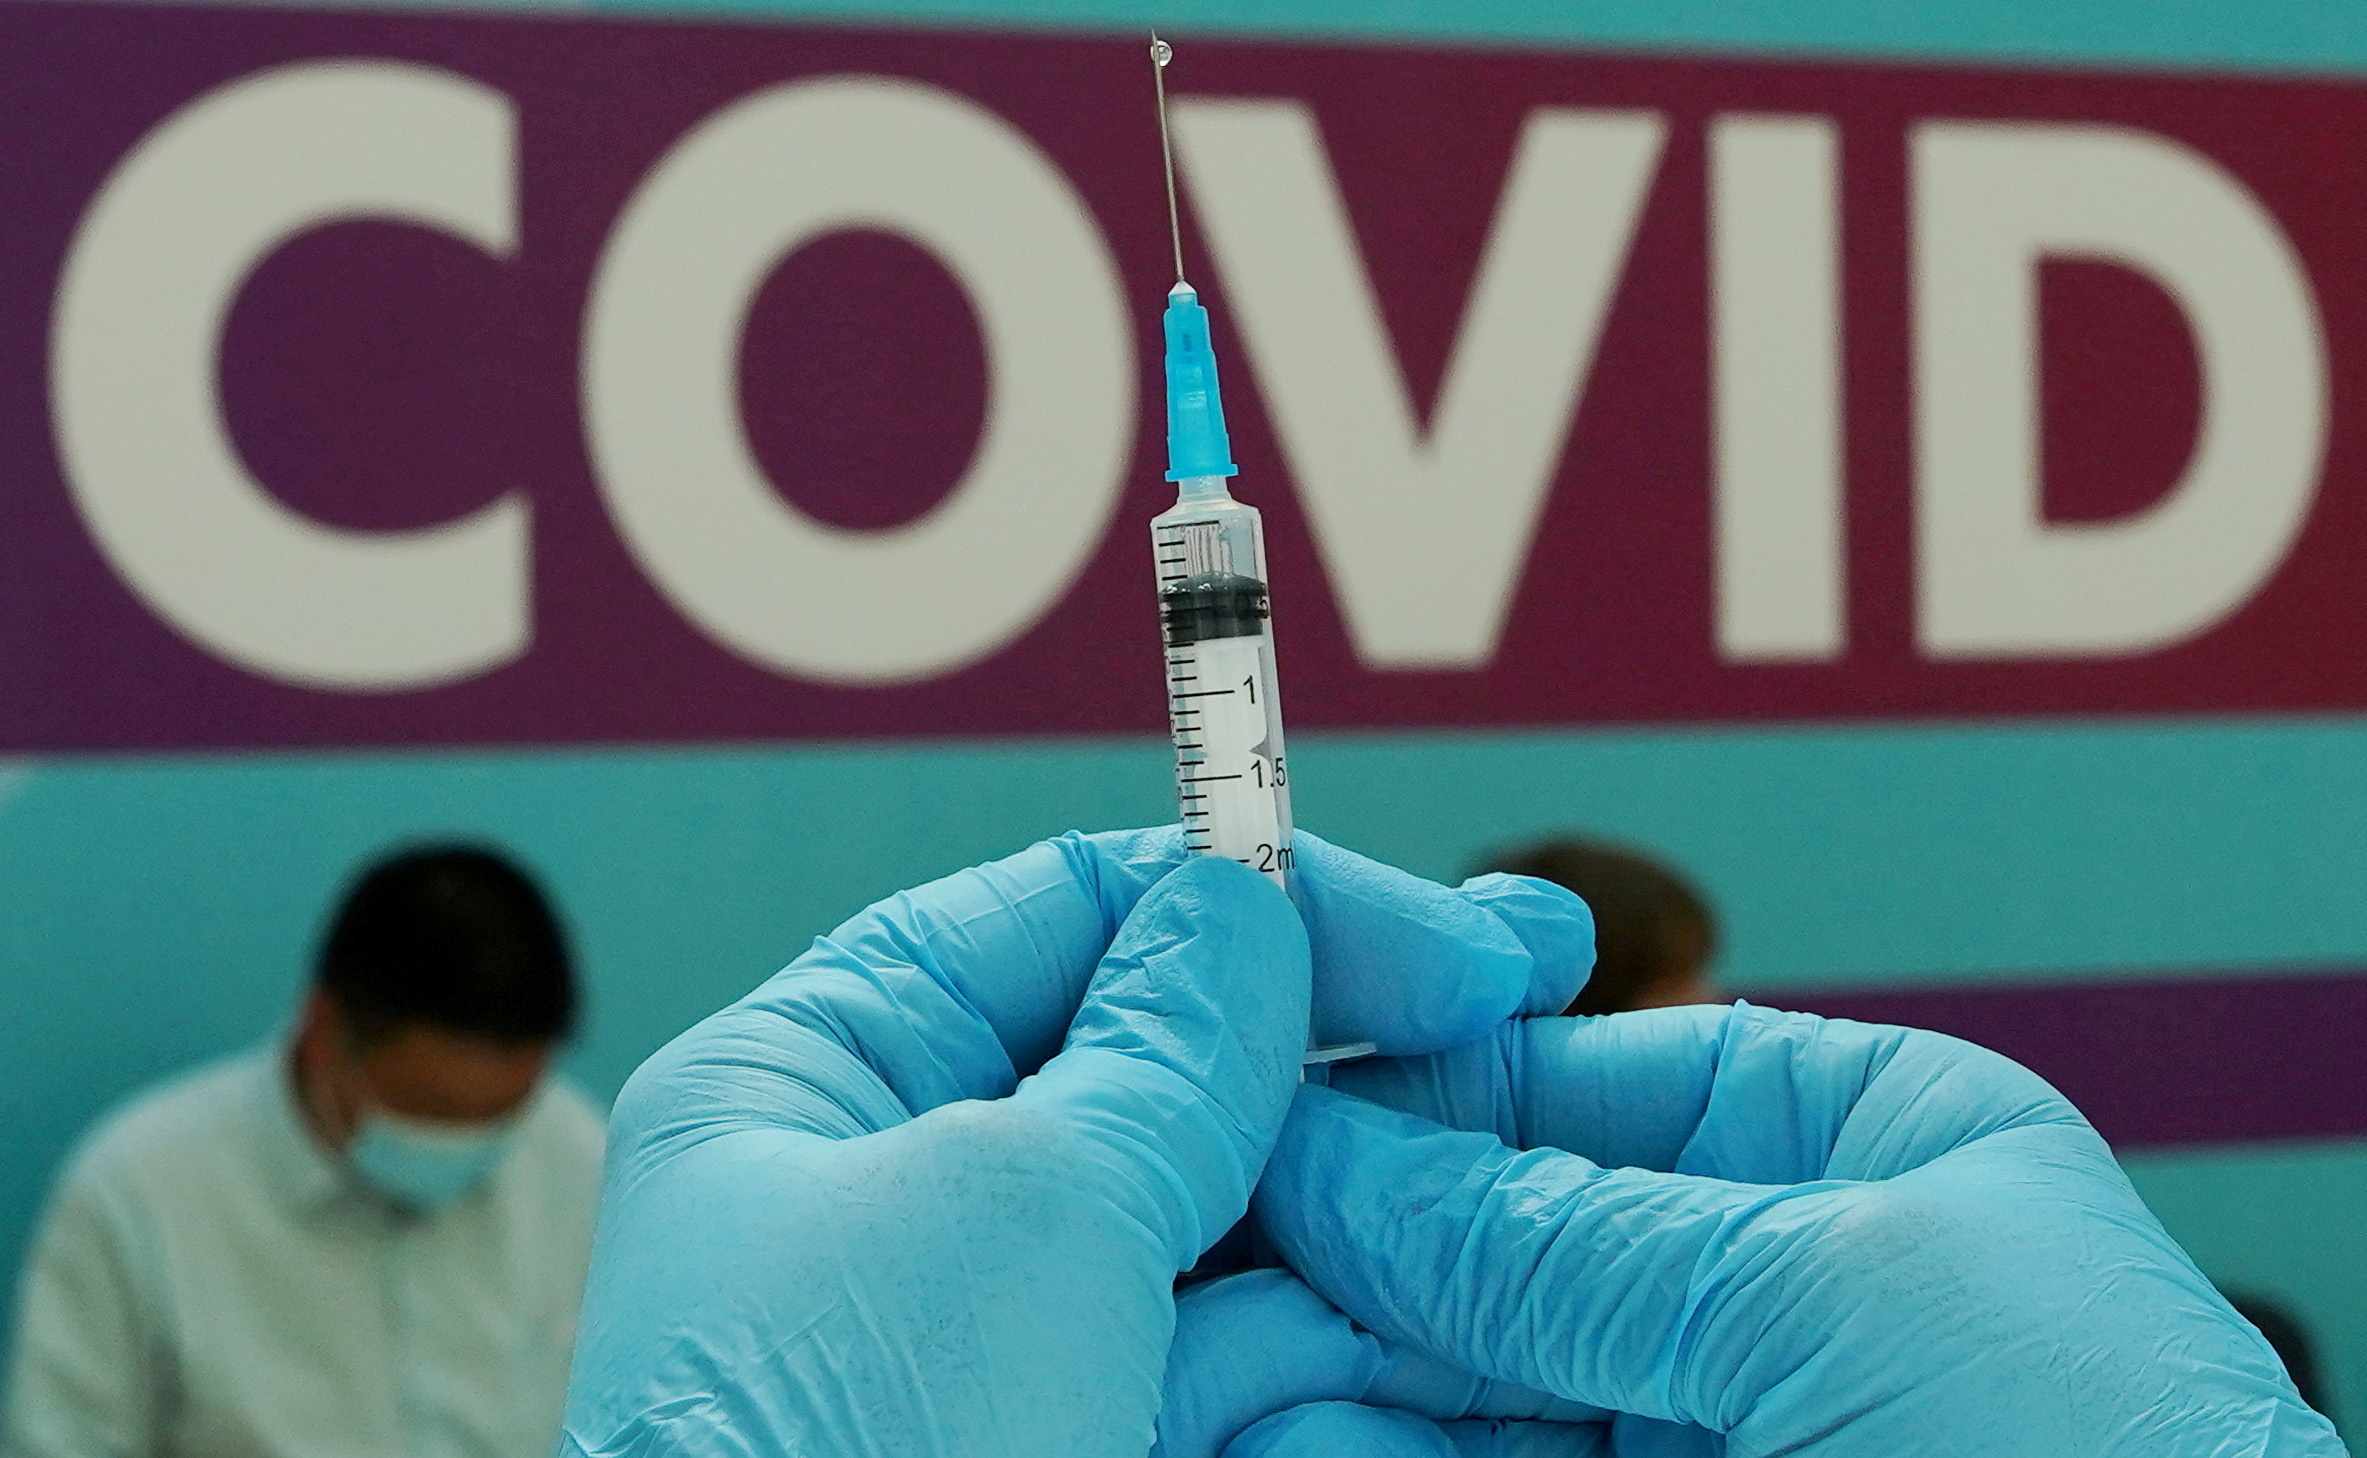 A healthcare worker prepares a dose of Sputnik V (Gam-COVID-Vac) vaccine against the coronavirus disease (COVID-19) at a vaccination centre in Gostiny Dvor in Moscow, Russia July 6, 2021. REUTERS/Tatyana Makeyeva/File Photo